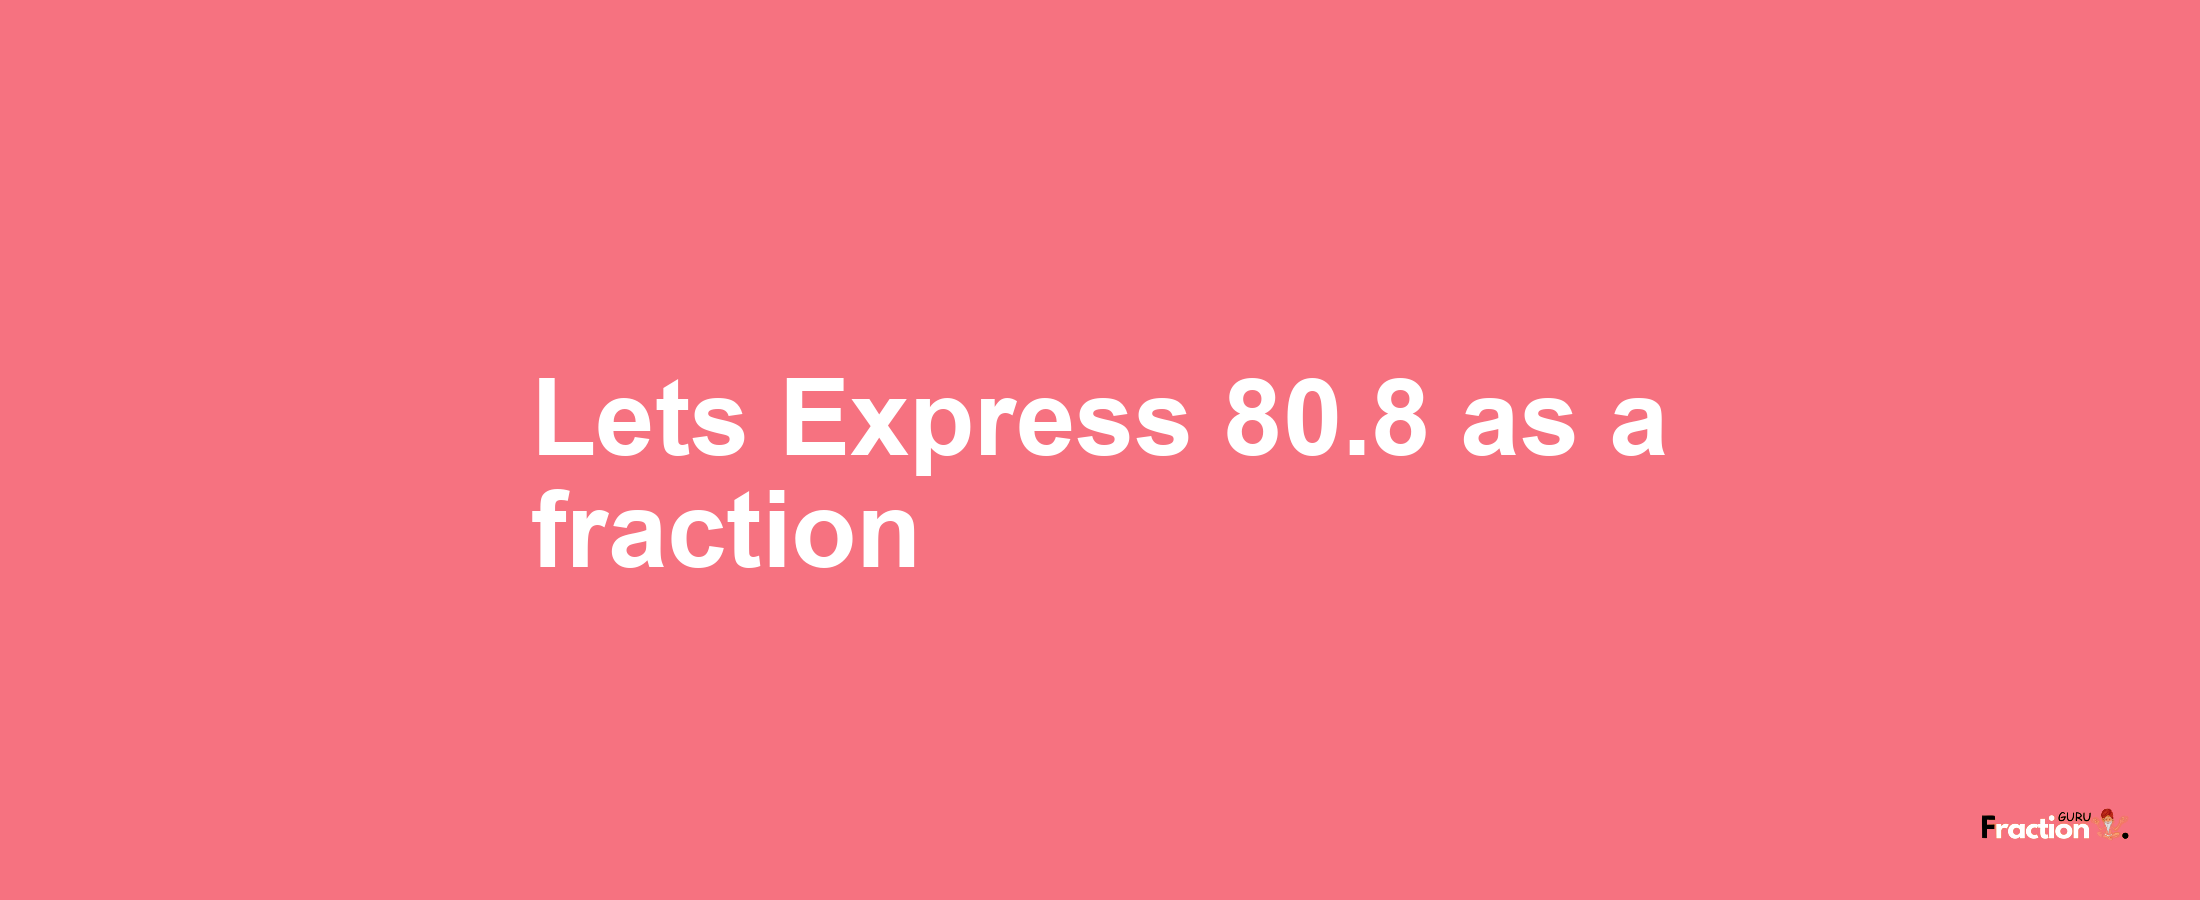 Lets Express 80.8 as afraction